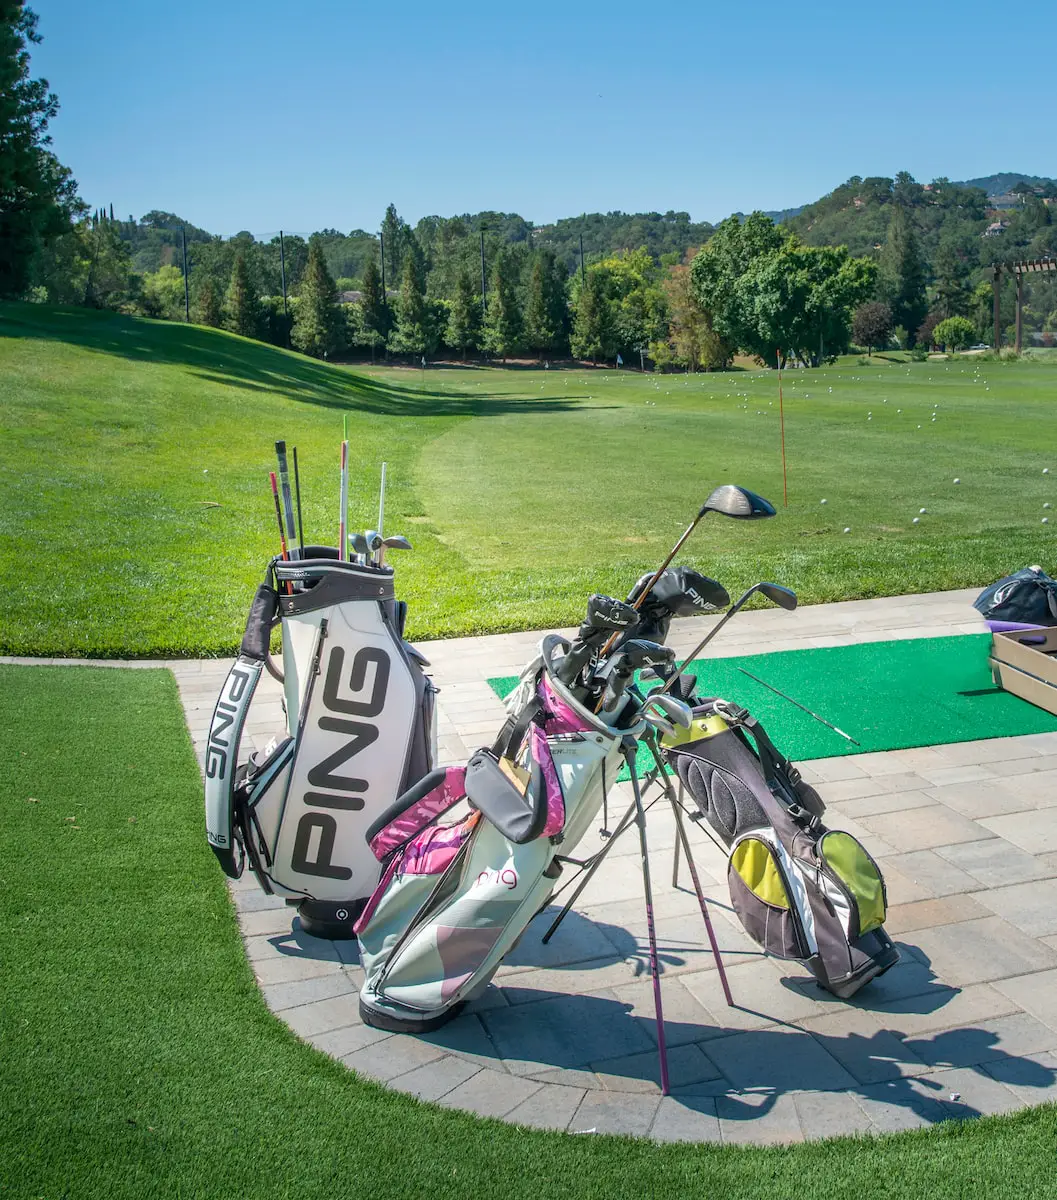 What are the benefits of renting clubs compared to buying them?